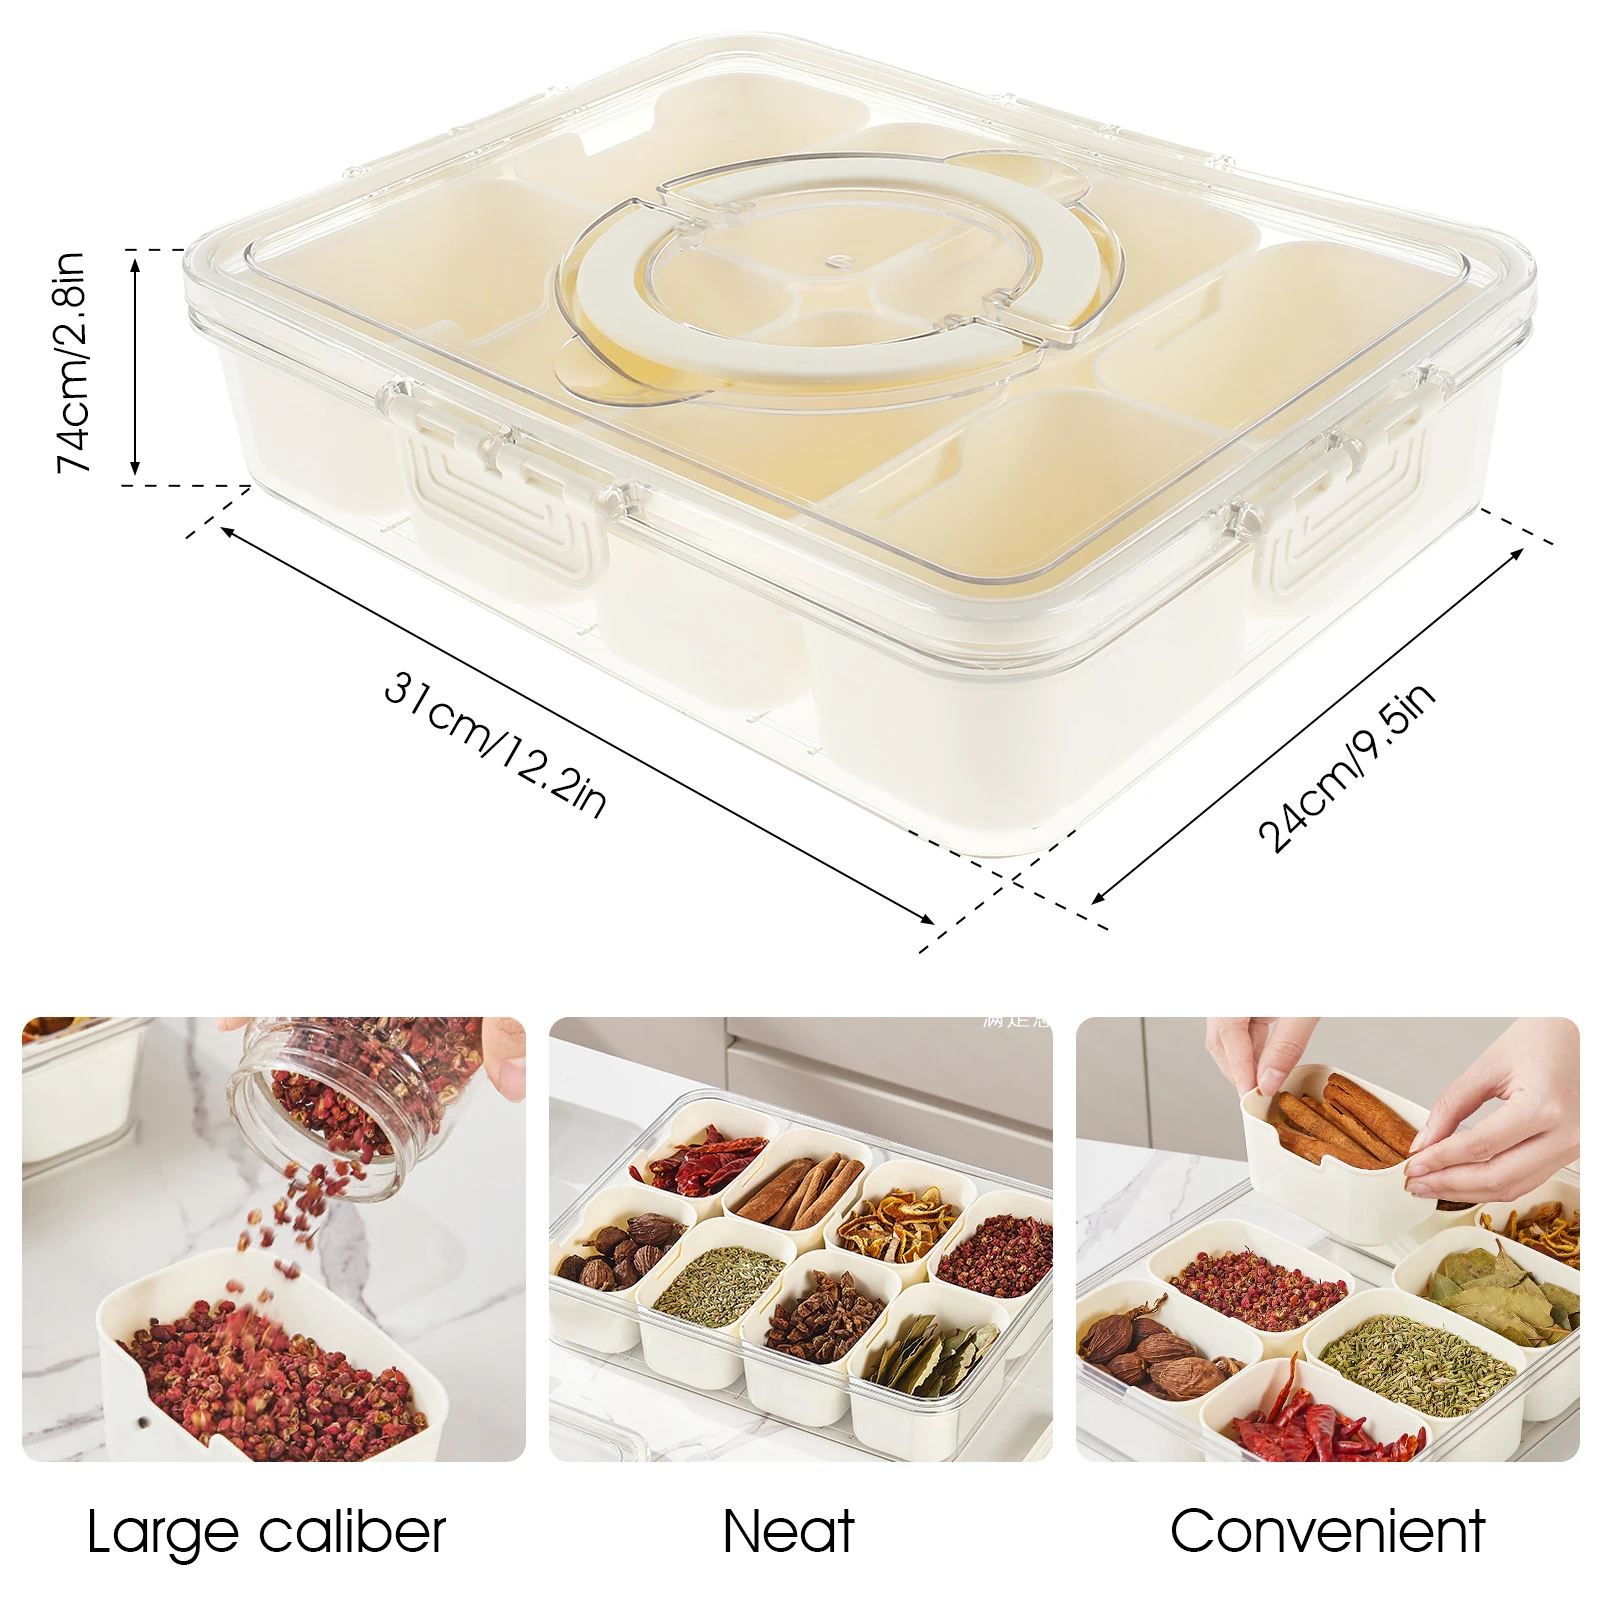 https://ae01.alicdn.com/kf/Sa36f46063a364699805ef7d1a6175901s/8-Grid-Divided-Serving-Tray-with-Lid-and-Handle-Portable-Snack-Platters-Organizer-Clear-Reusable-Plastic.jpg